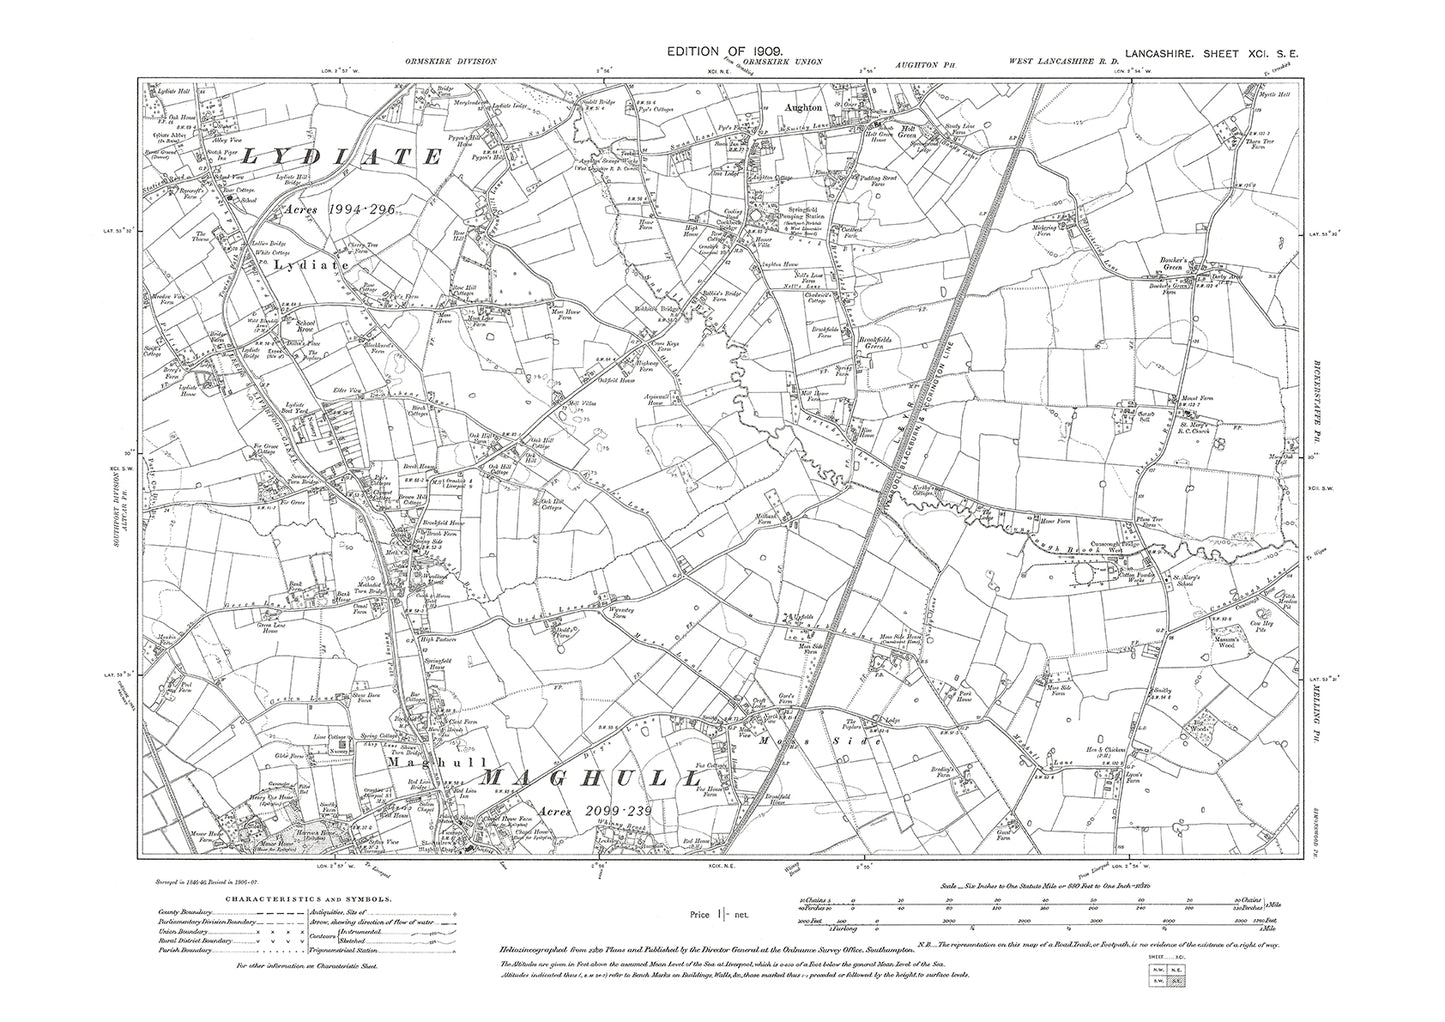 Maghull (north), Lydiate, Aughton - Lancashire in 1909 : 91SE